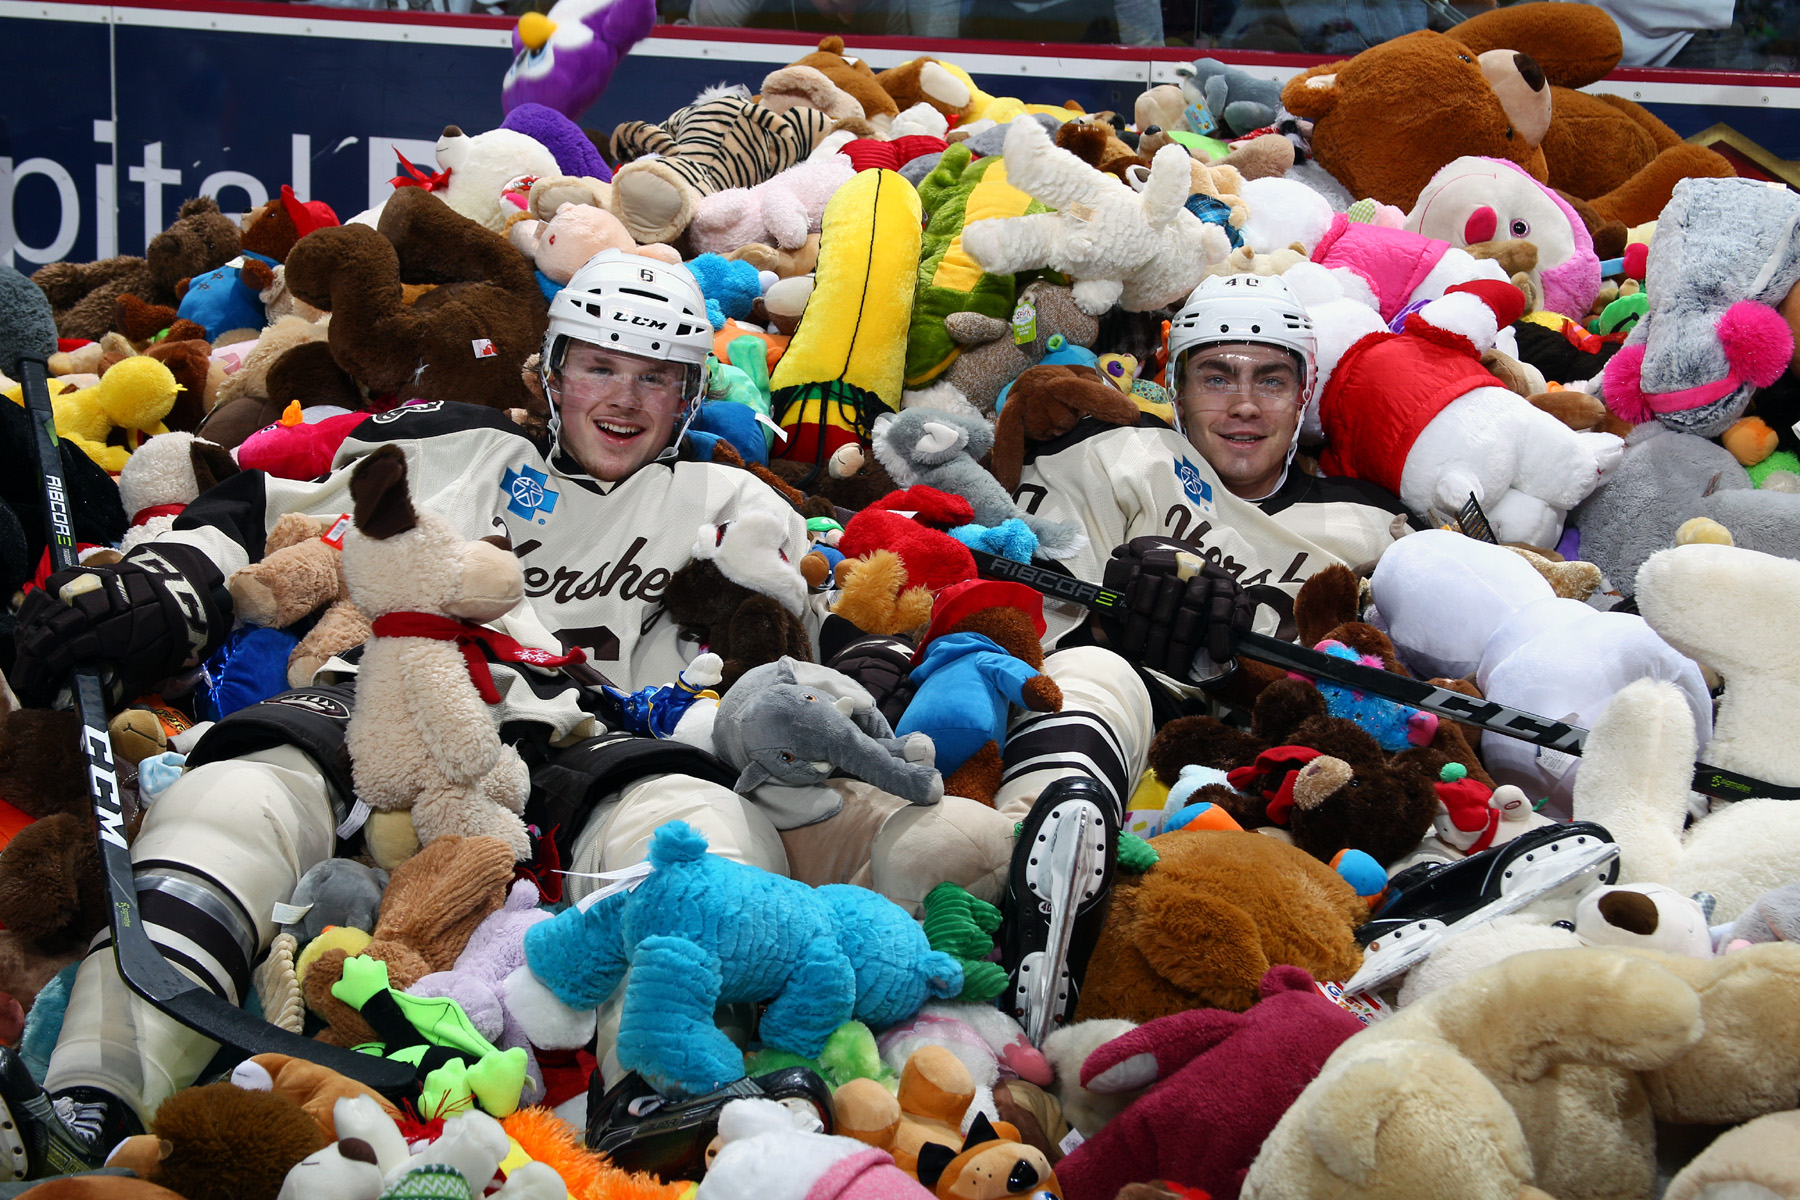 Grand Rapids Griffins  Griffins Host 20th Annual Teddy Bear Toss Against  Manitoba